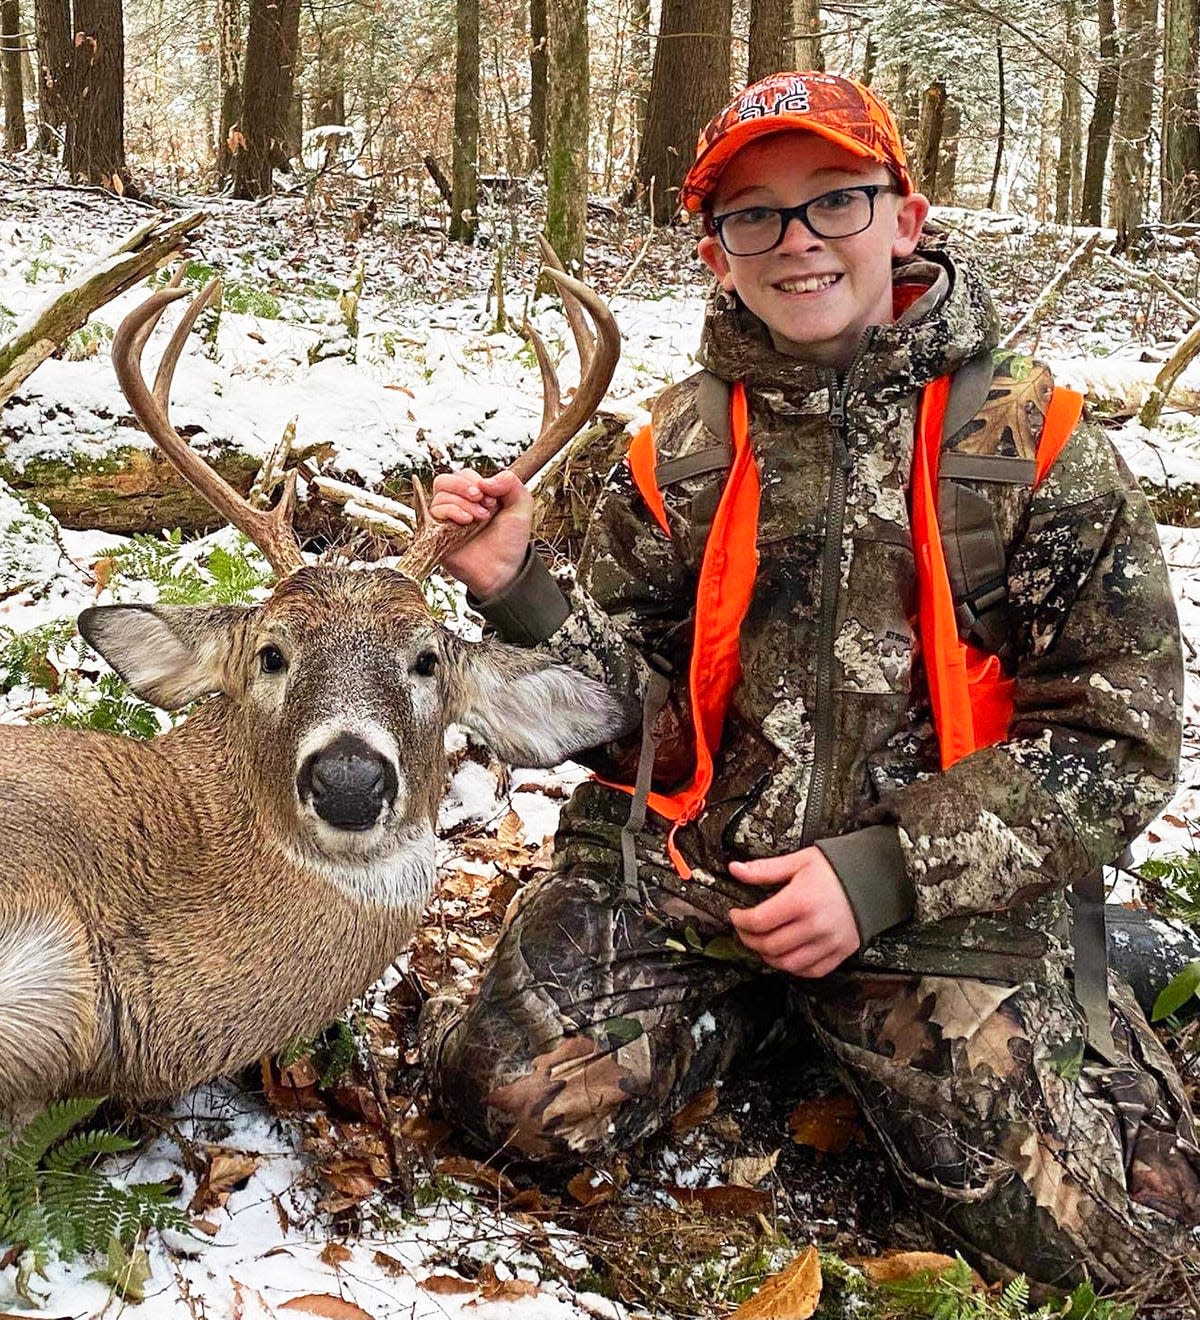 Brody Walsh bagged this huge 8-pointer at the Swago Hunting Club in Damascus. The 11-year-old was out with his Dad and used a .243 to make the kill from a distance of about 120 yards.